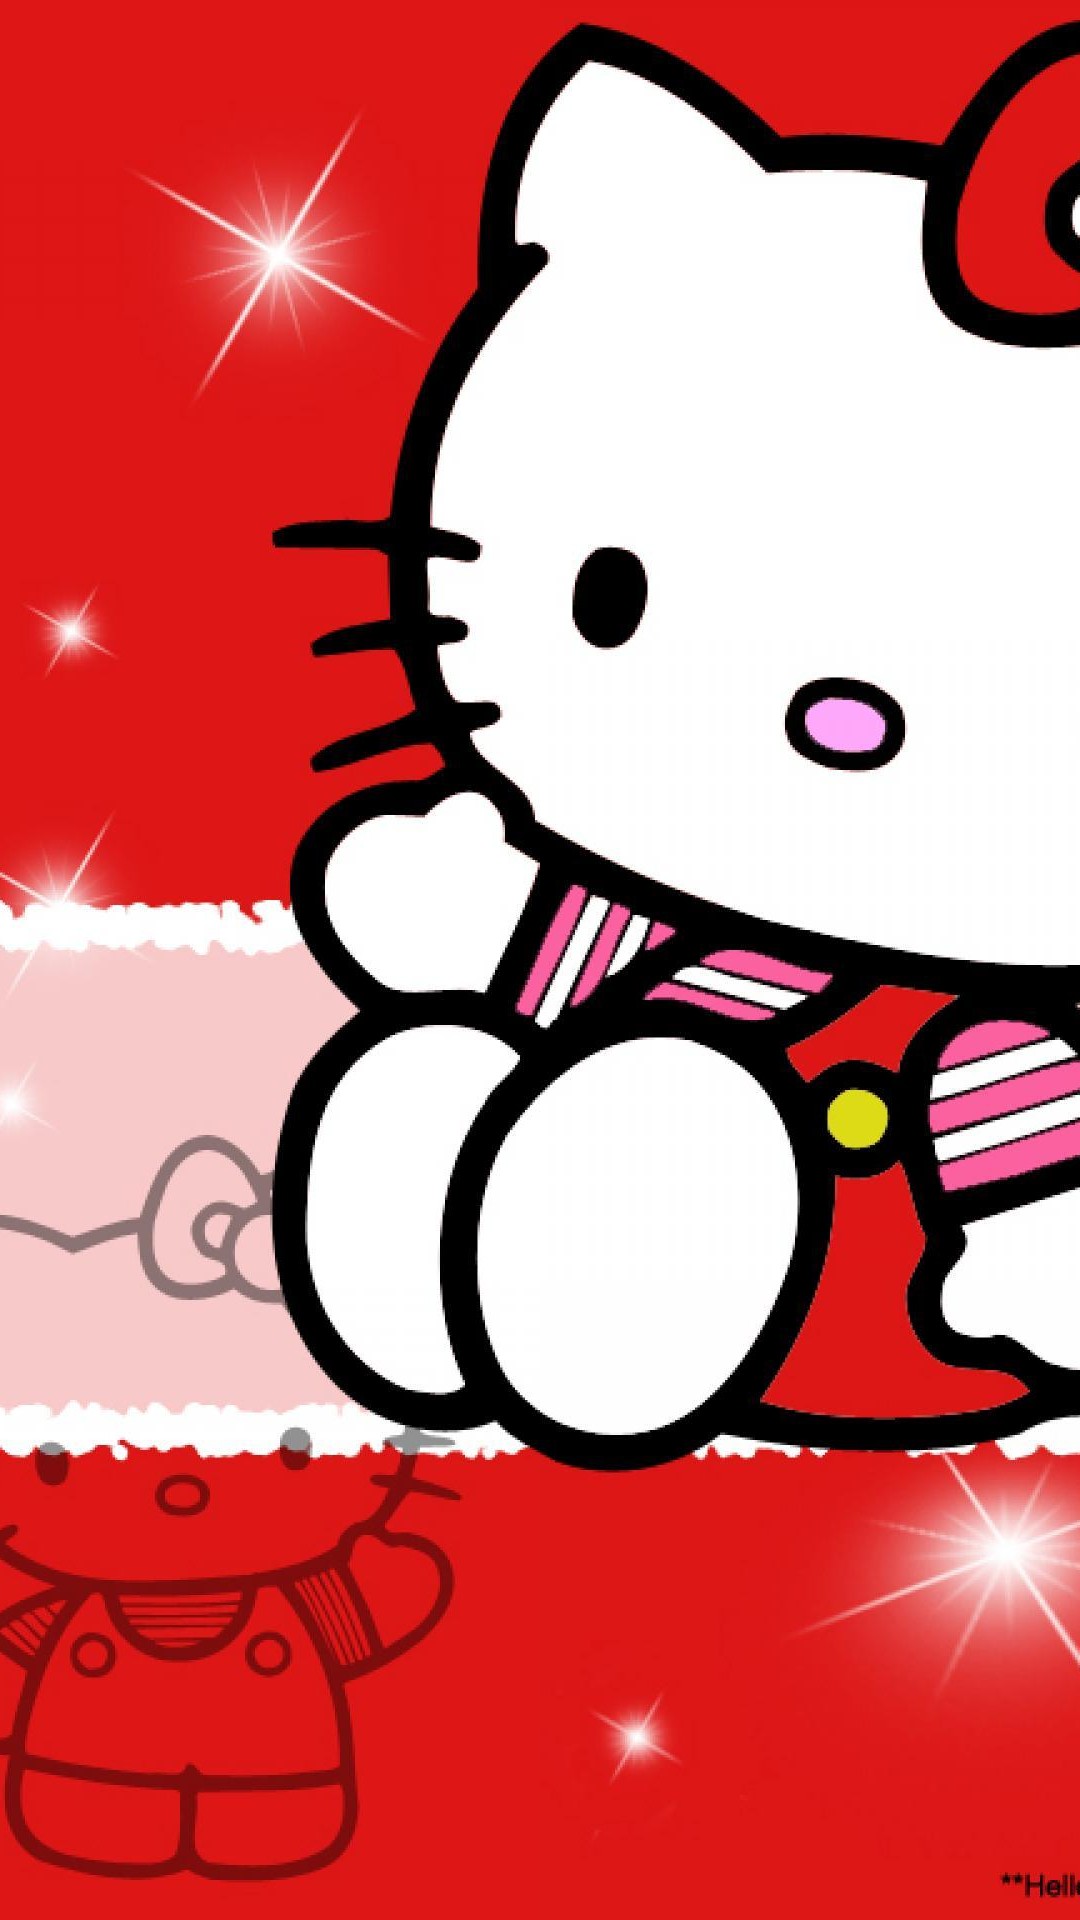 Hello Kitty Pictures iPhone 8 Wallpaper with image resolution 1080x1920 pixel. You can use this wallpaper as background for your desktop Computer Screensavers, Android or iPhone smartphones